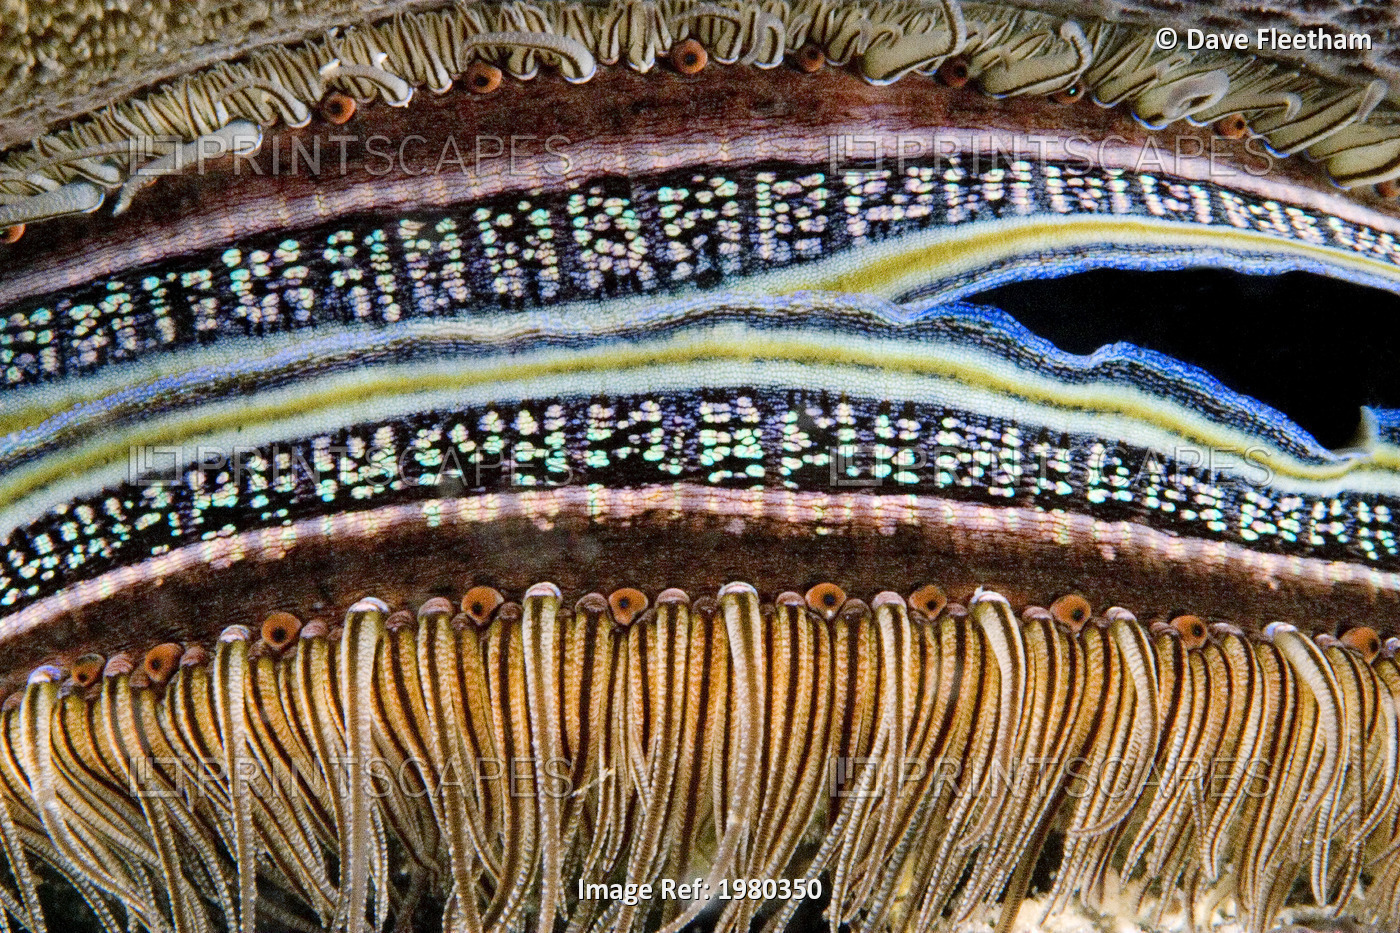 Malaysia, Tiny eyes lining edge of Coral-Boring Scallop's mantle (Pedum ...